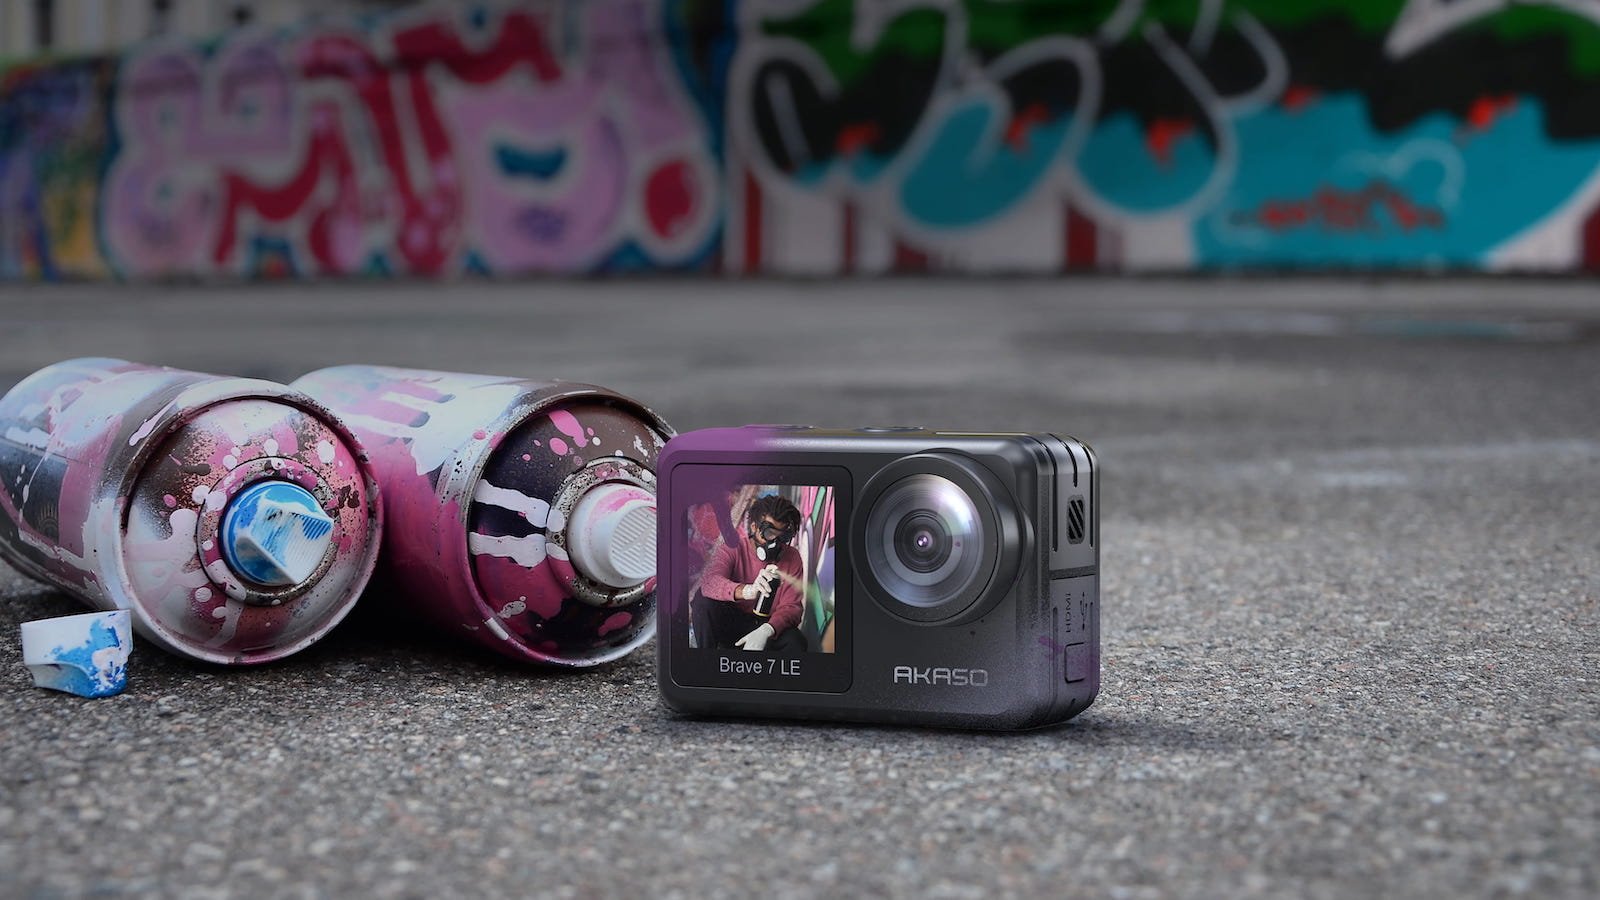 AKASO Brave 7 LE weatherproof action camera has a dual-screen design for selfies & photos